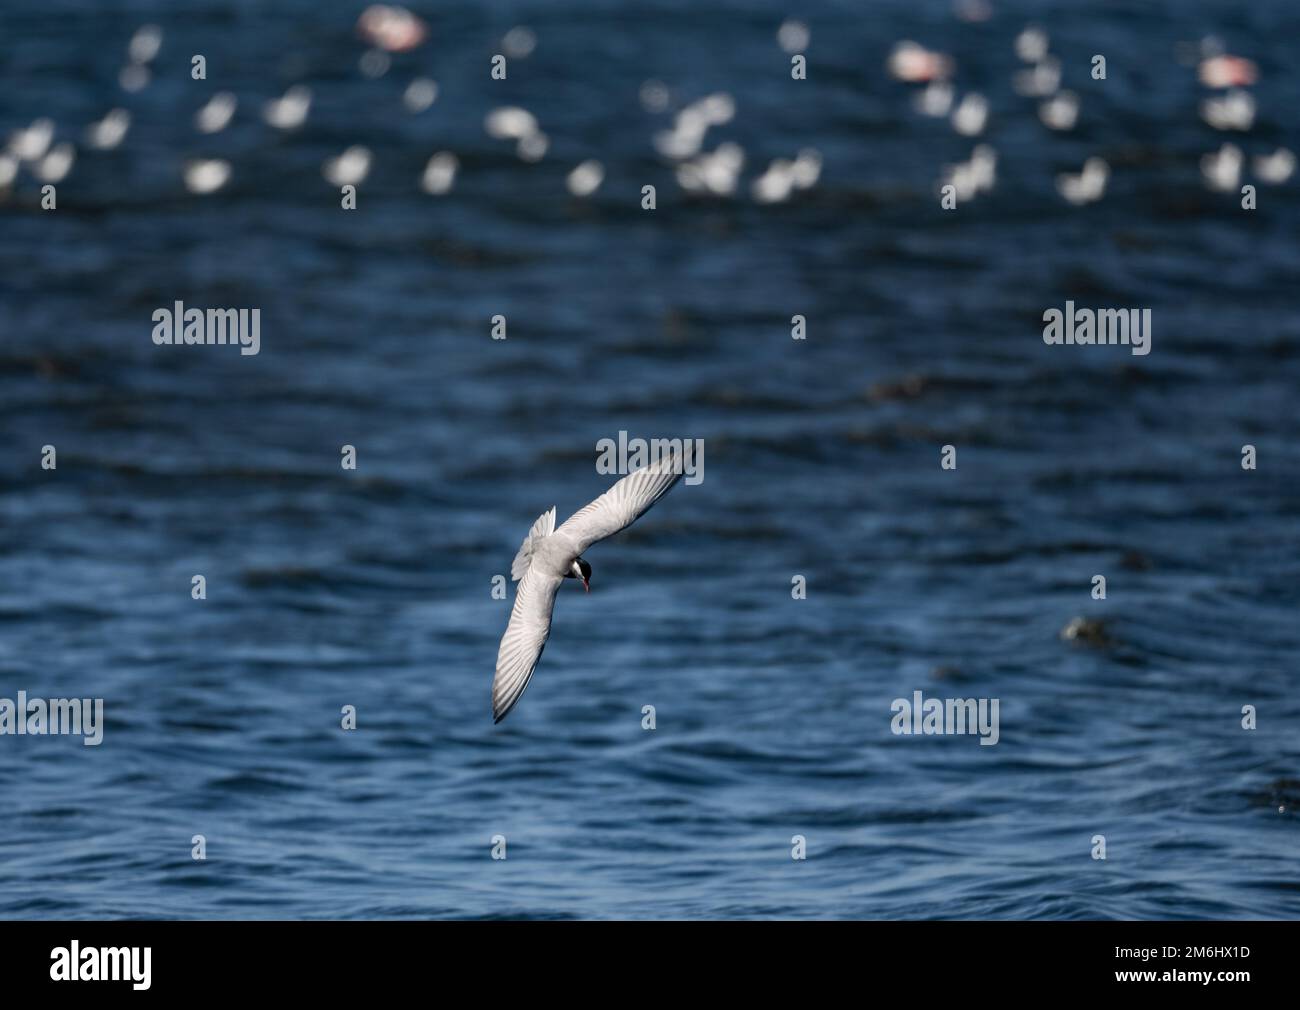 A Whiskered Tern (Chlidonias hybrida) dive into water. Western Cape, South Africa. Stock Photo